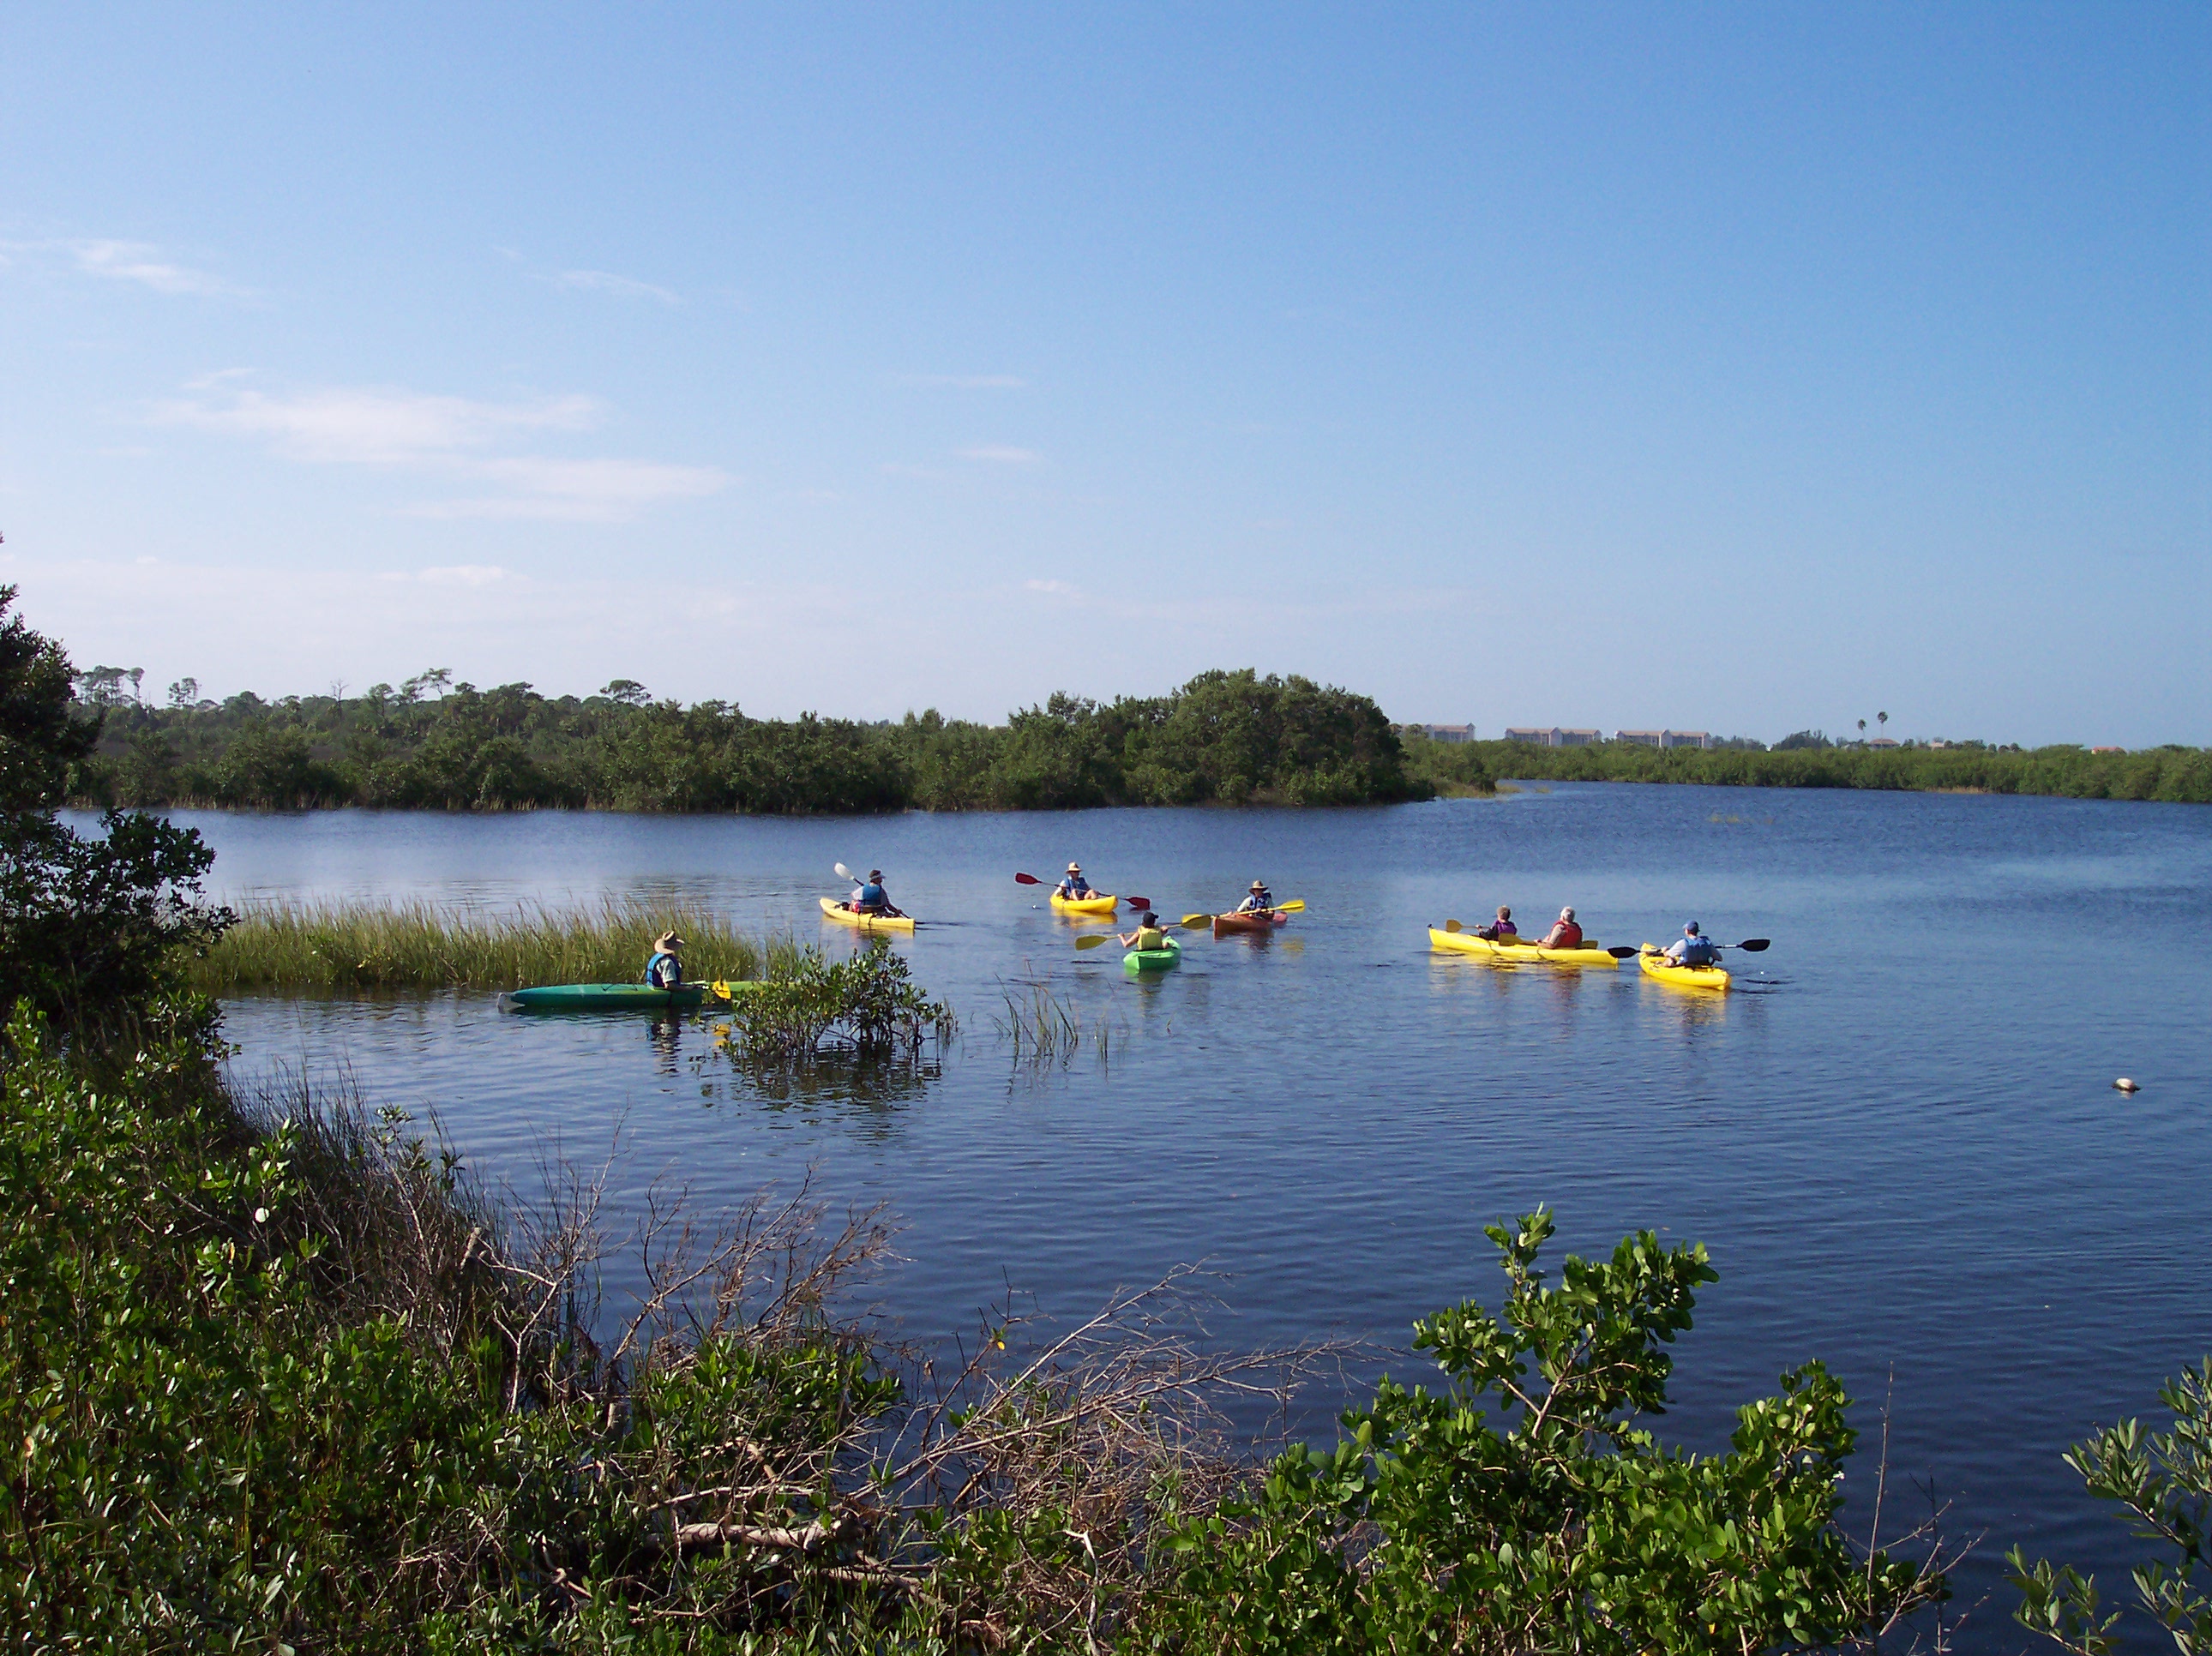 A group of kayakers out on the water.